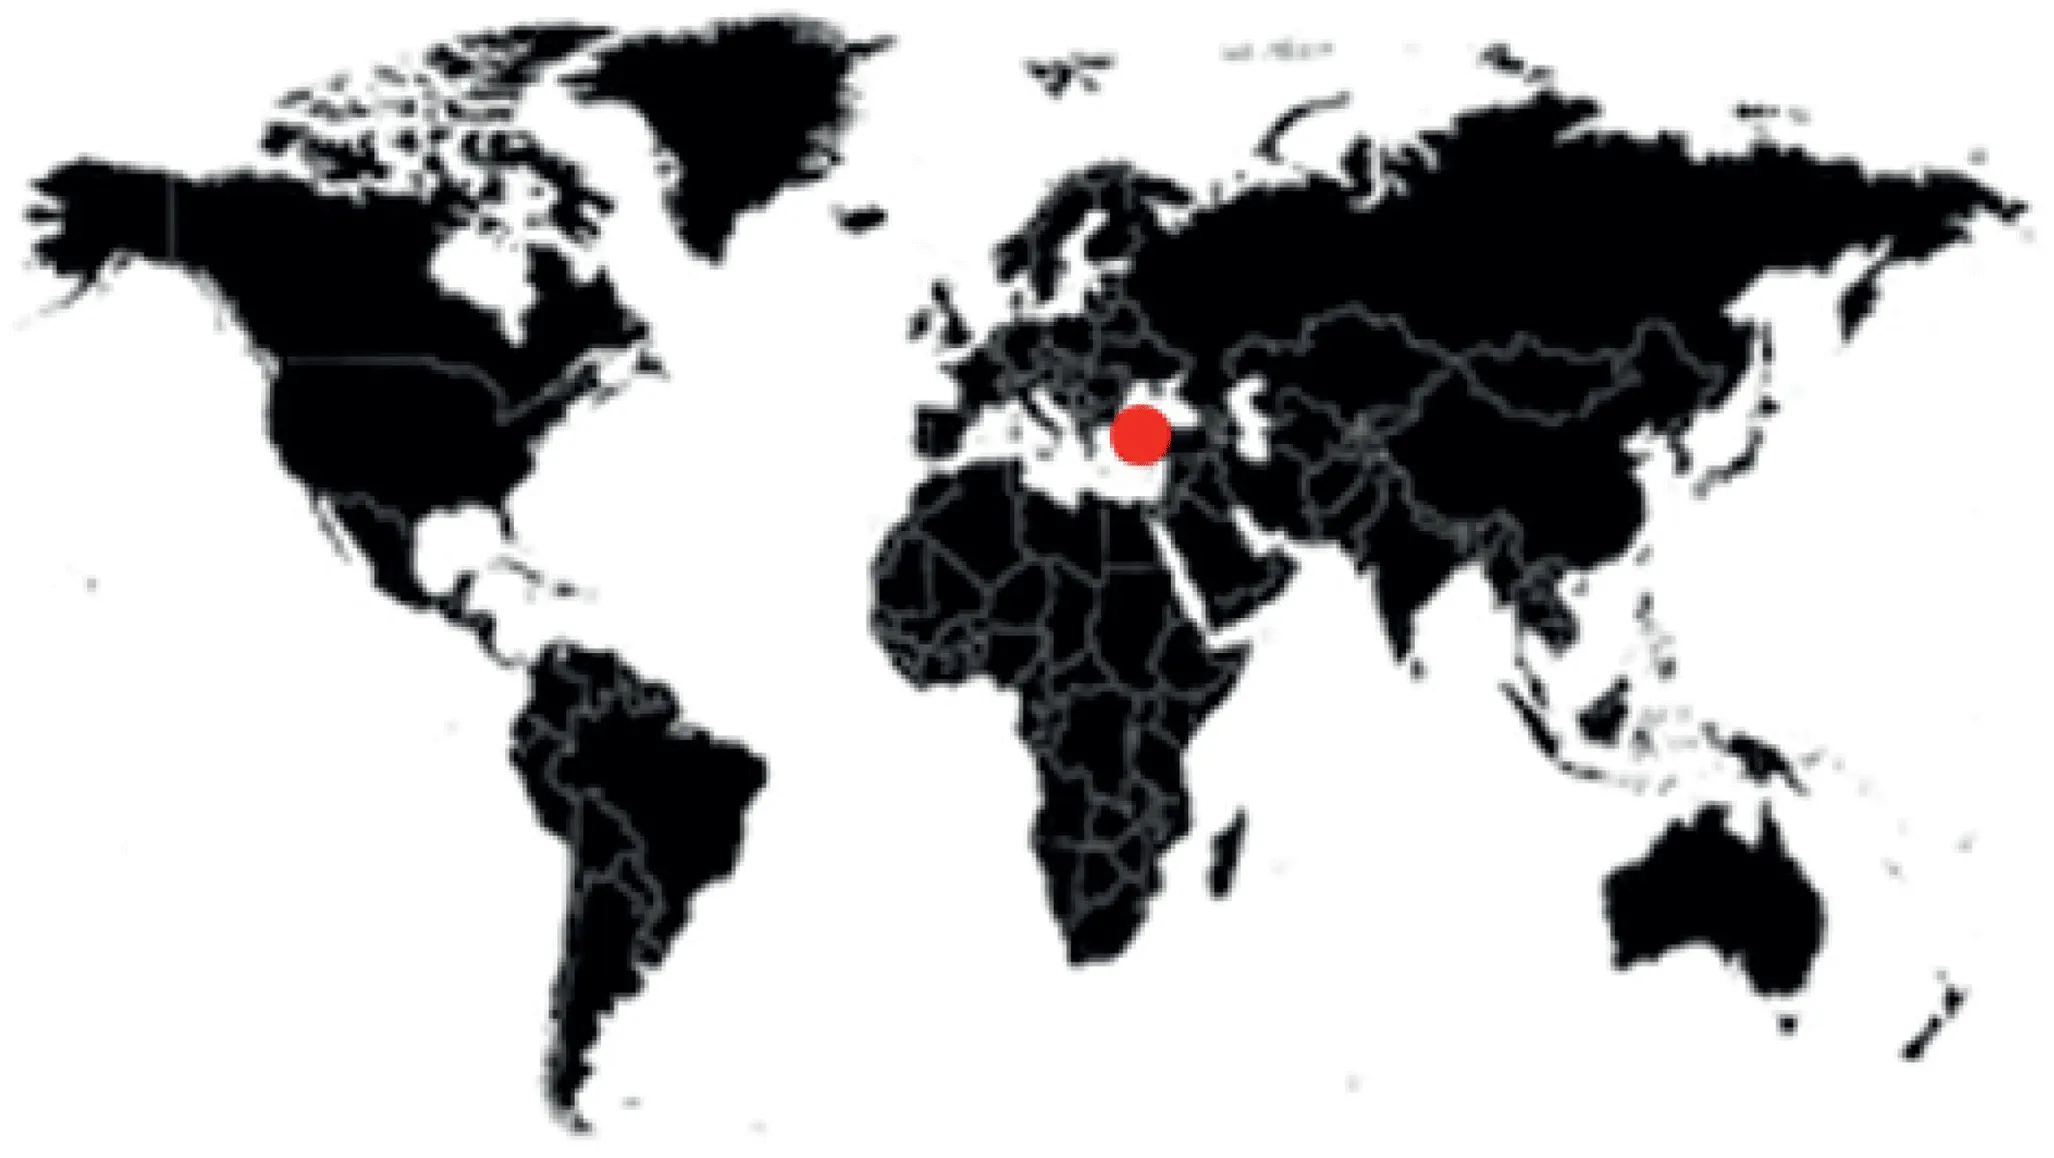 An illustration of a world map with the location of Turkey marked.